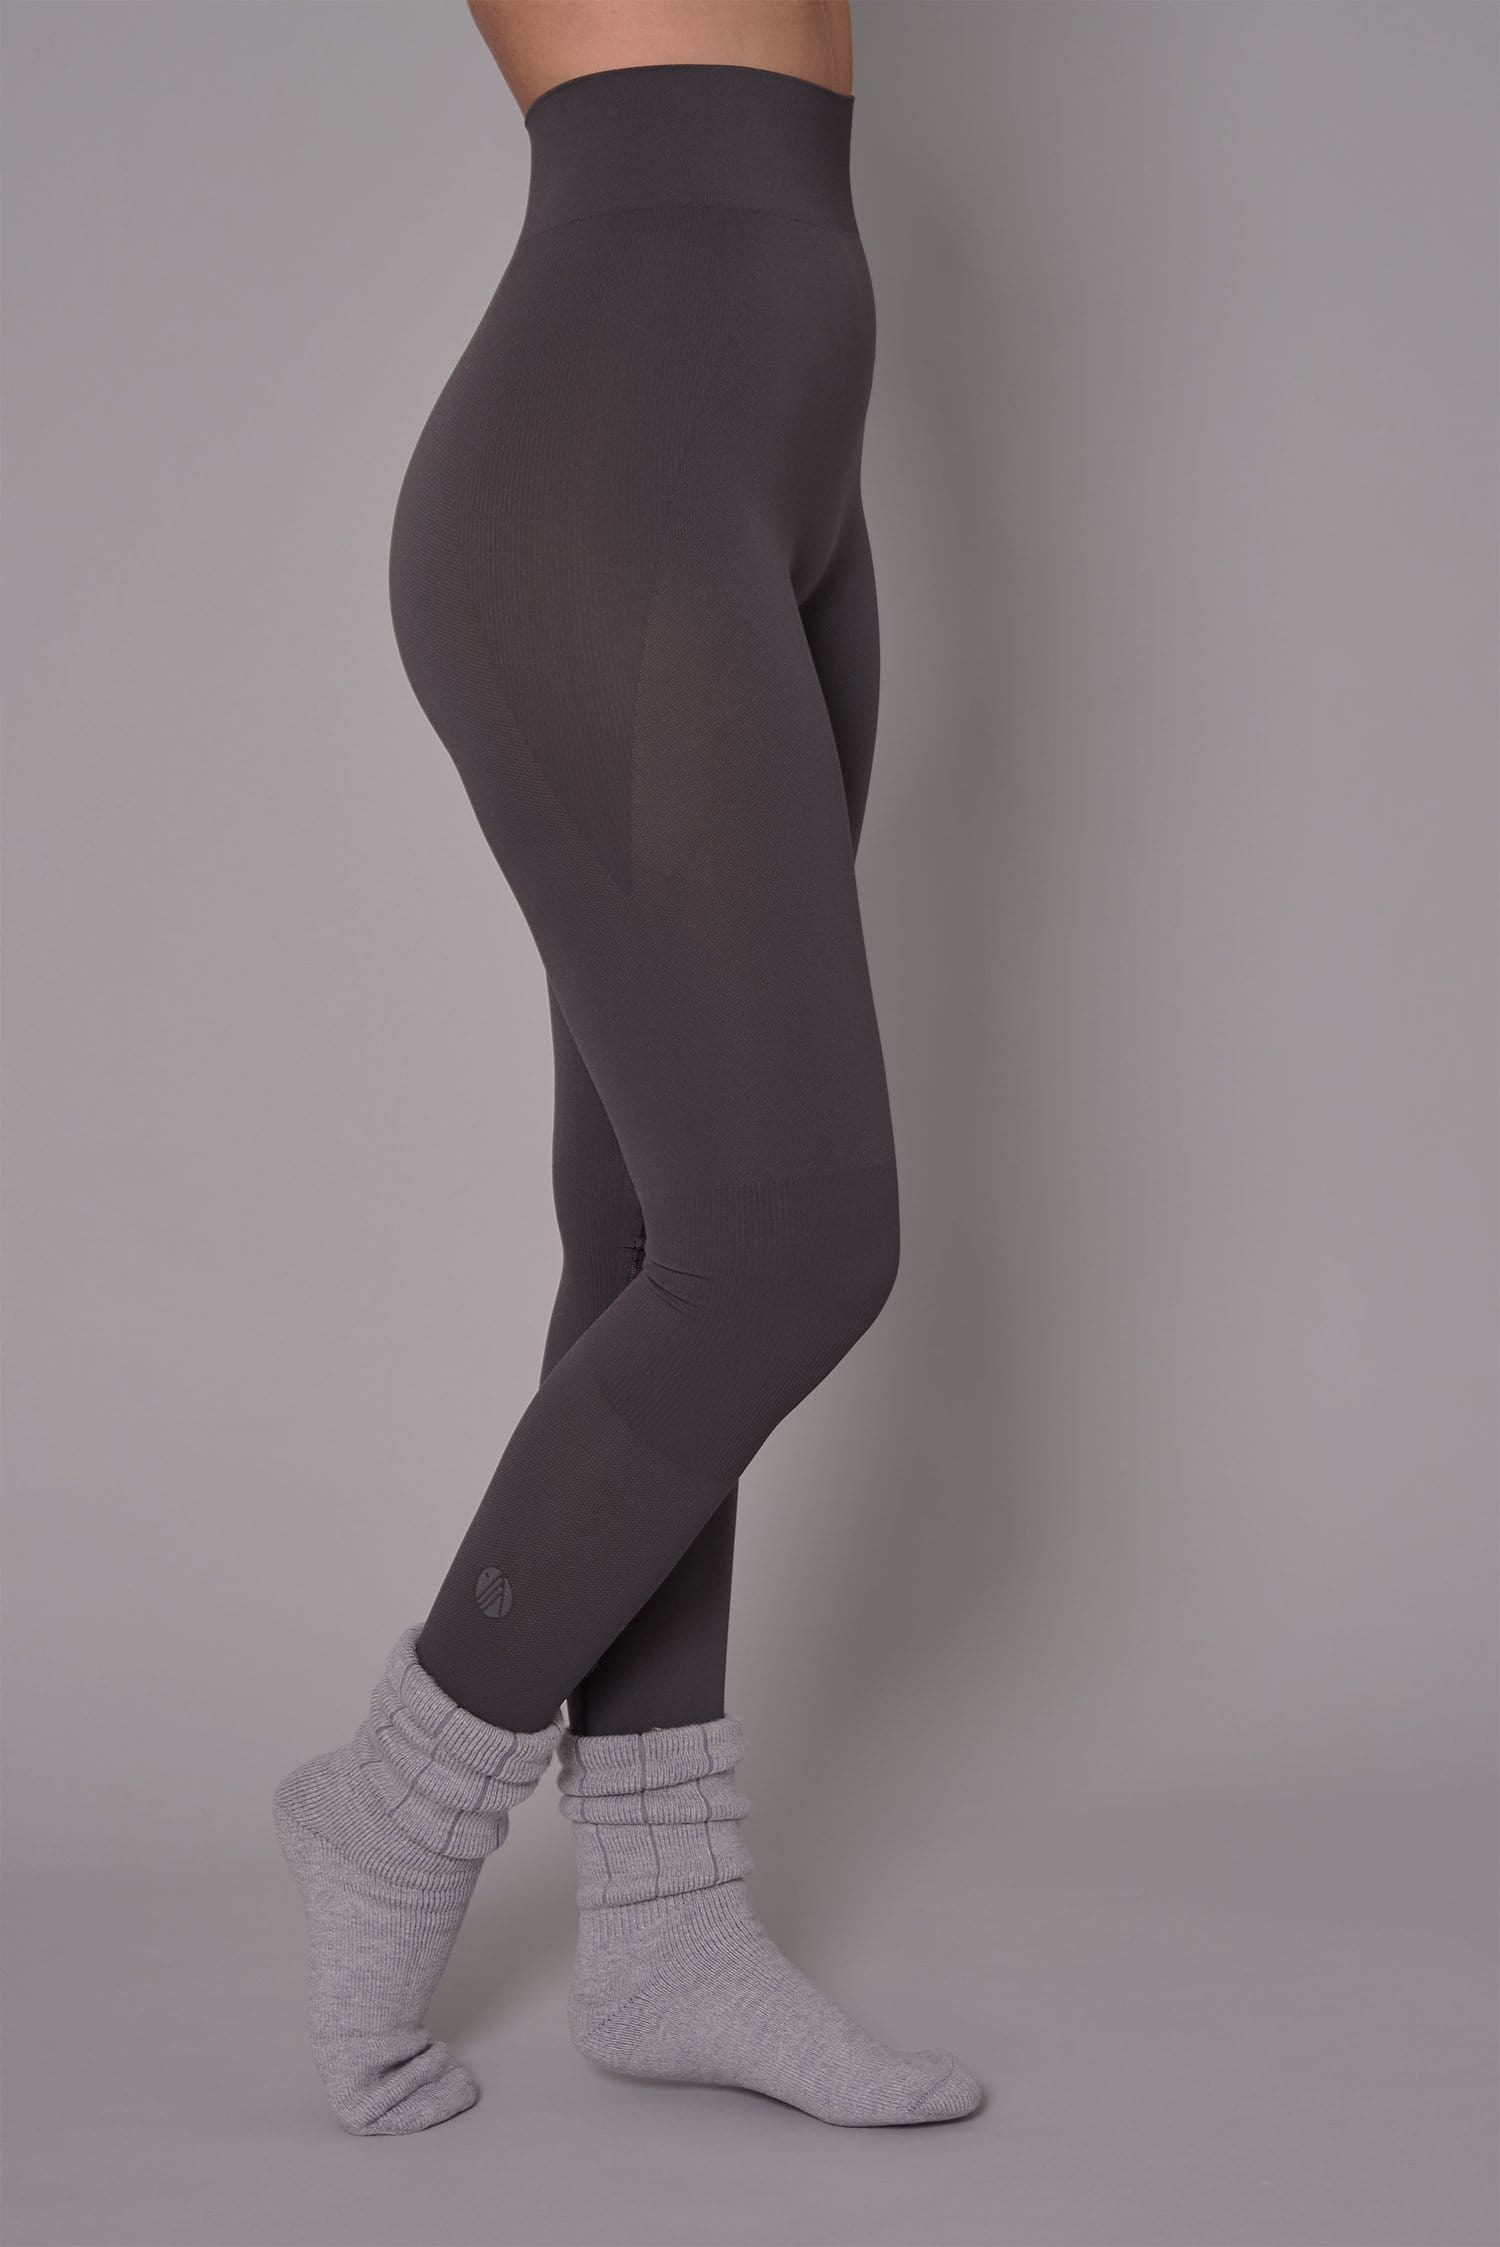 Thermal Seamless Base Layer Tights - Storm Grey - Xsmall - Small - Womens - Acai Outdoorwear